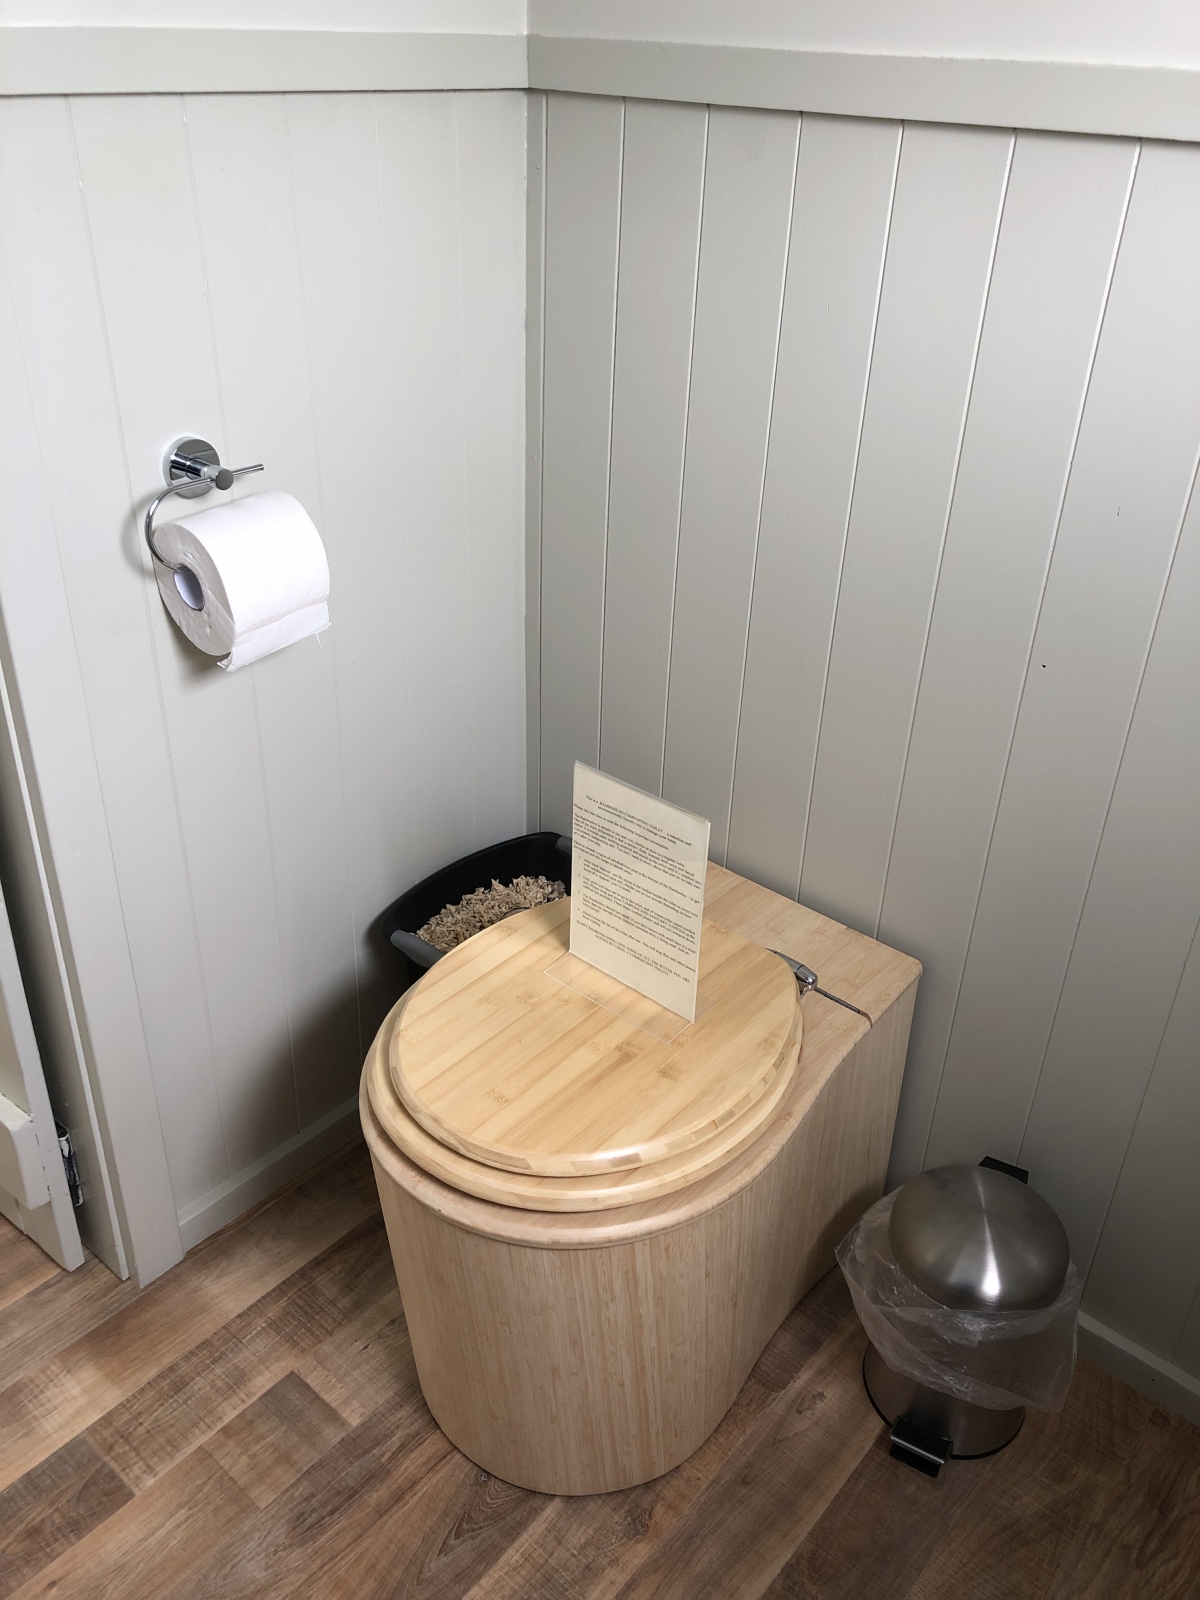 Photo of property: Bambooloo composting toilet in the ensuite bathroom